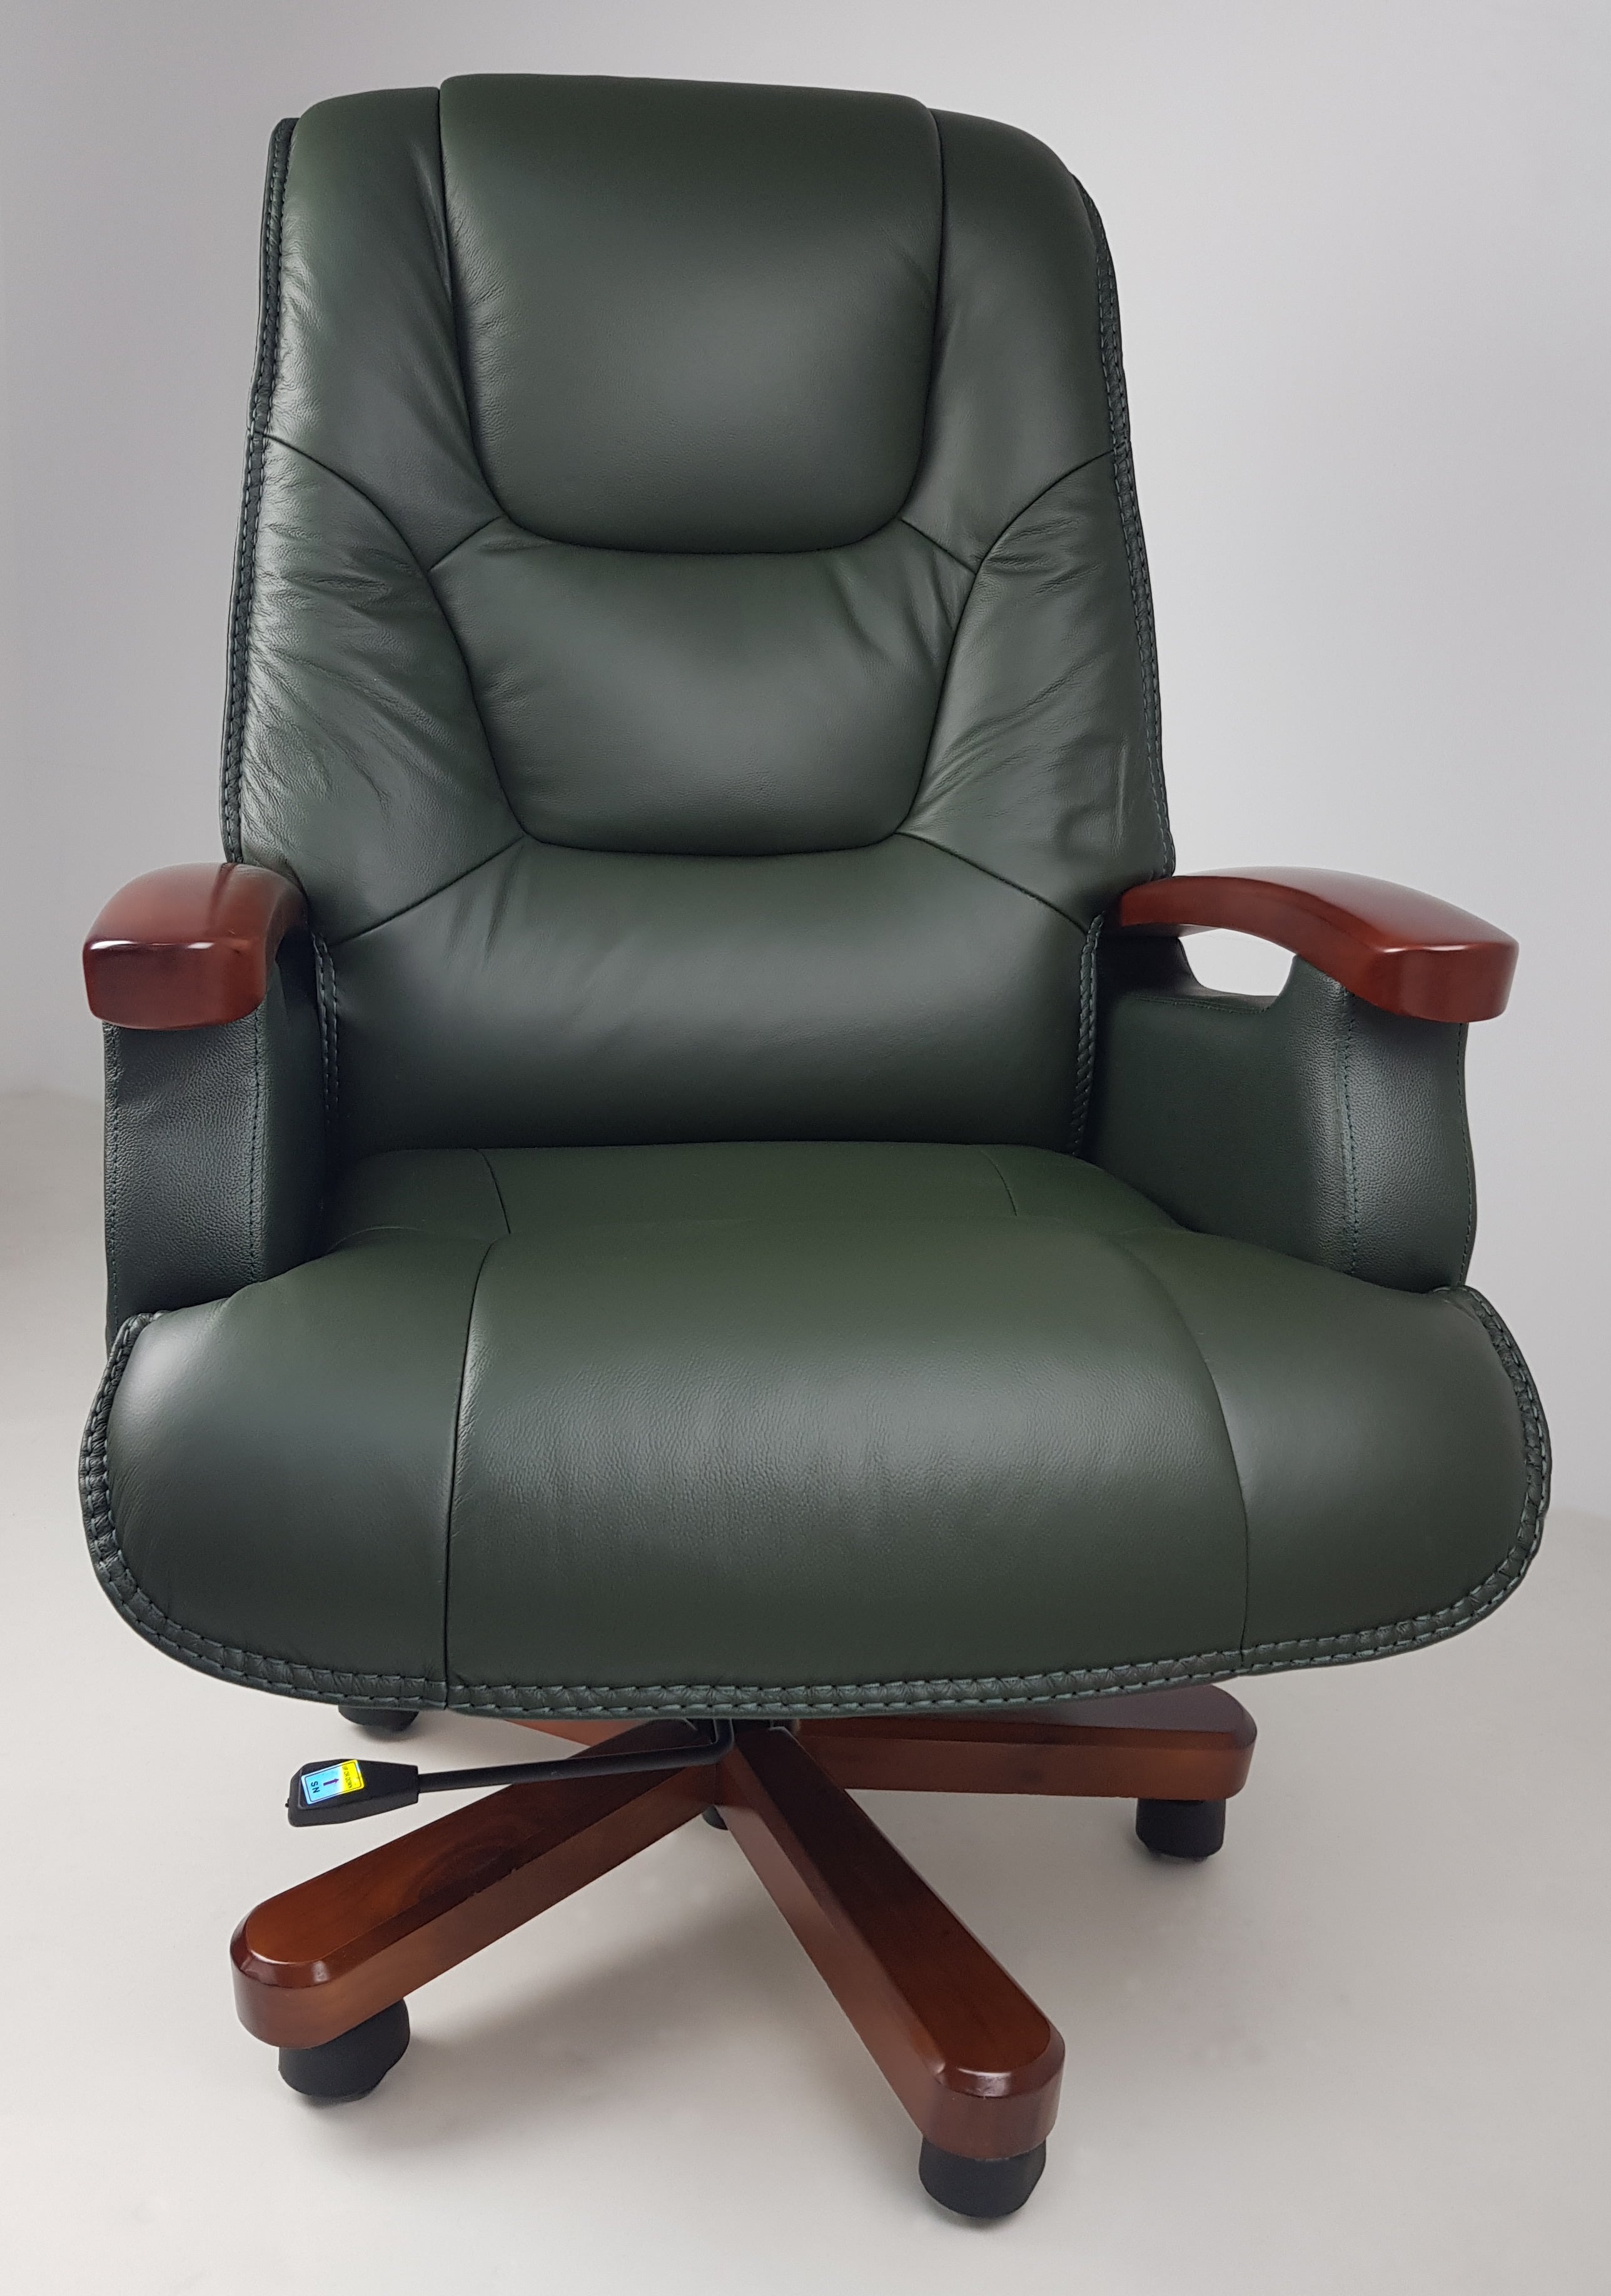 Luxury Green Leather Executive Office Chair - A302